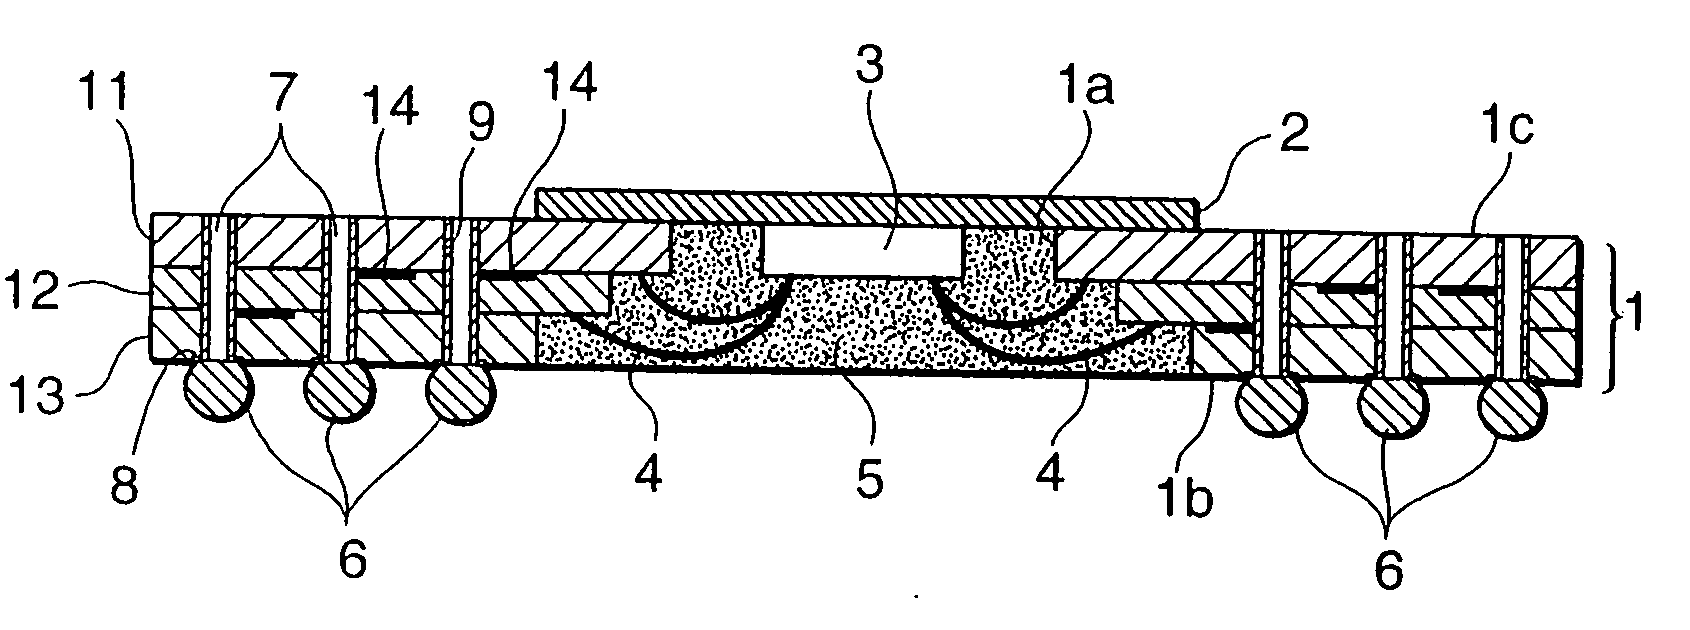 Semiconductor device, method for mounting the same, and method for repairing the same